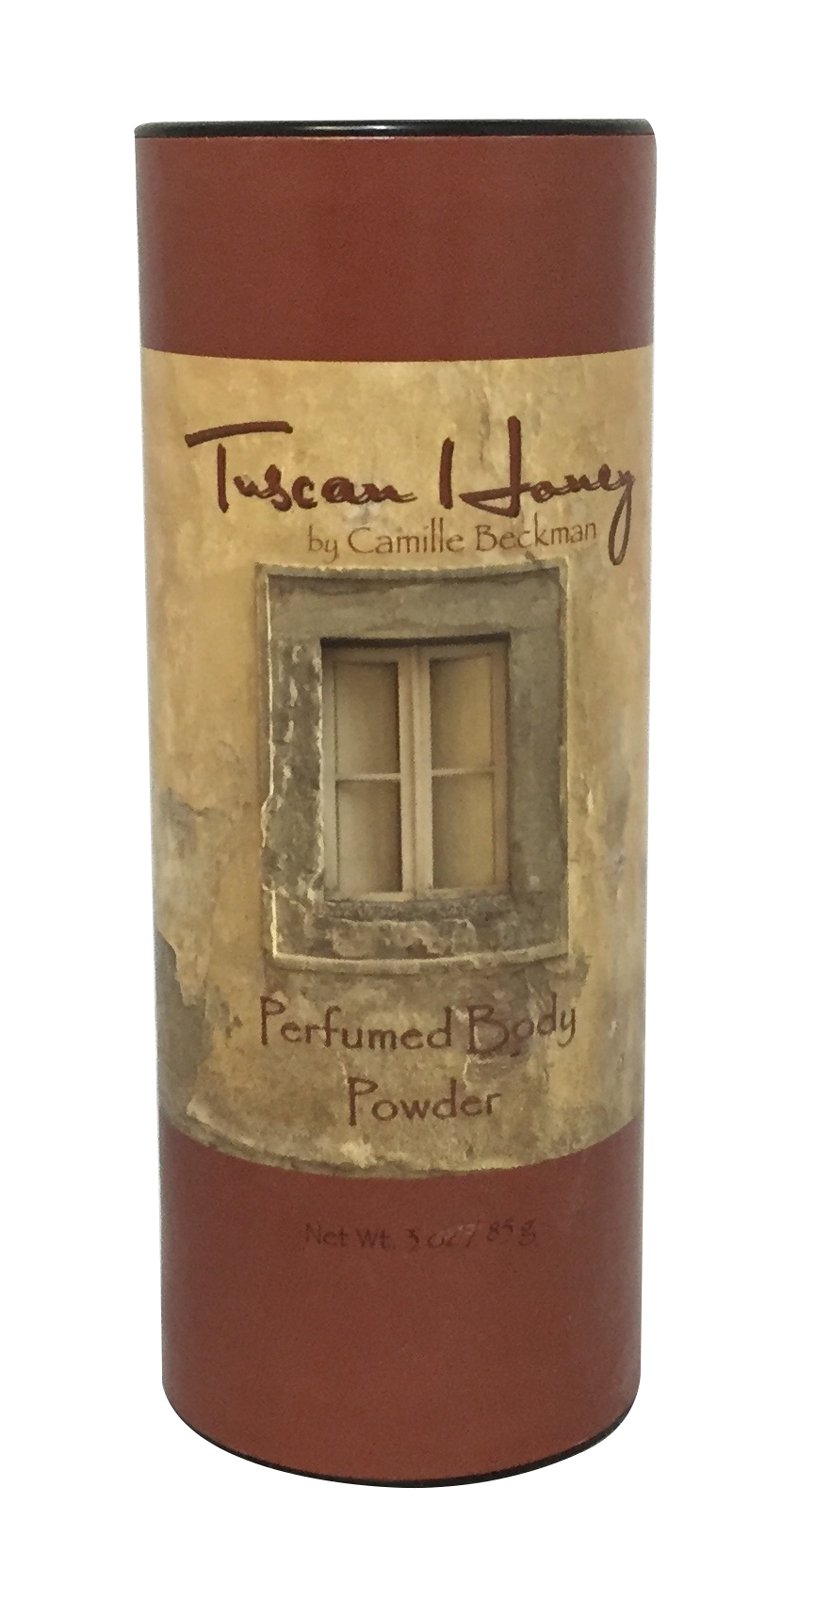 Camille Beckman Perfumed Body Powder, Tuscan Honey, 3 Ounce